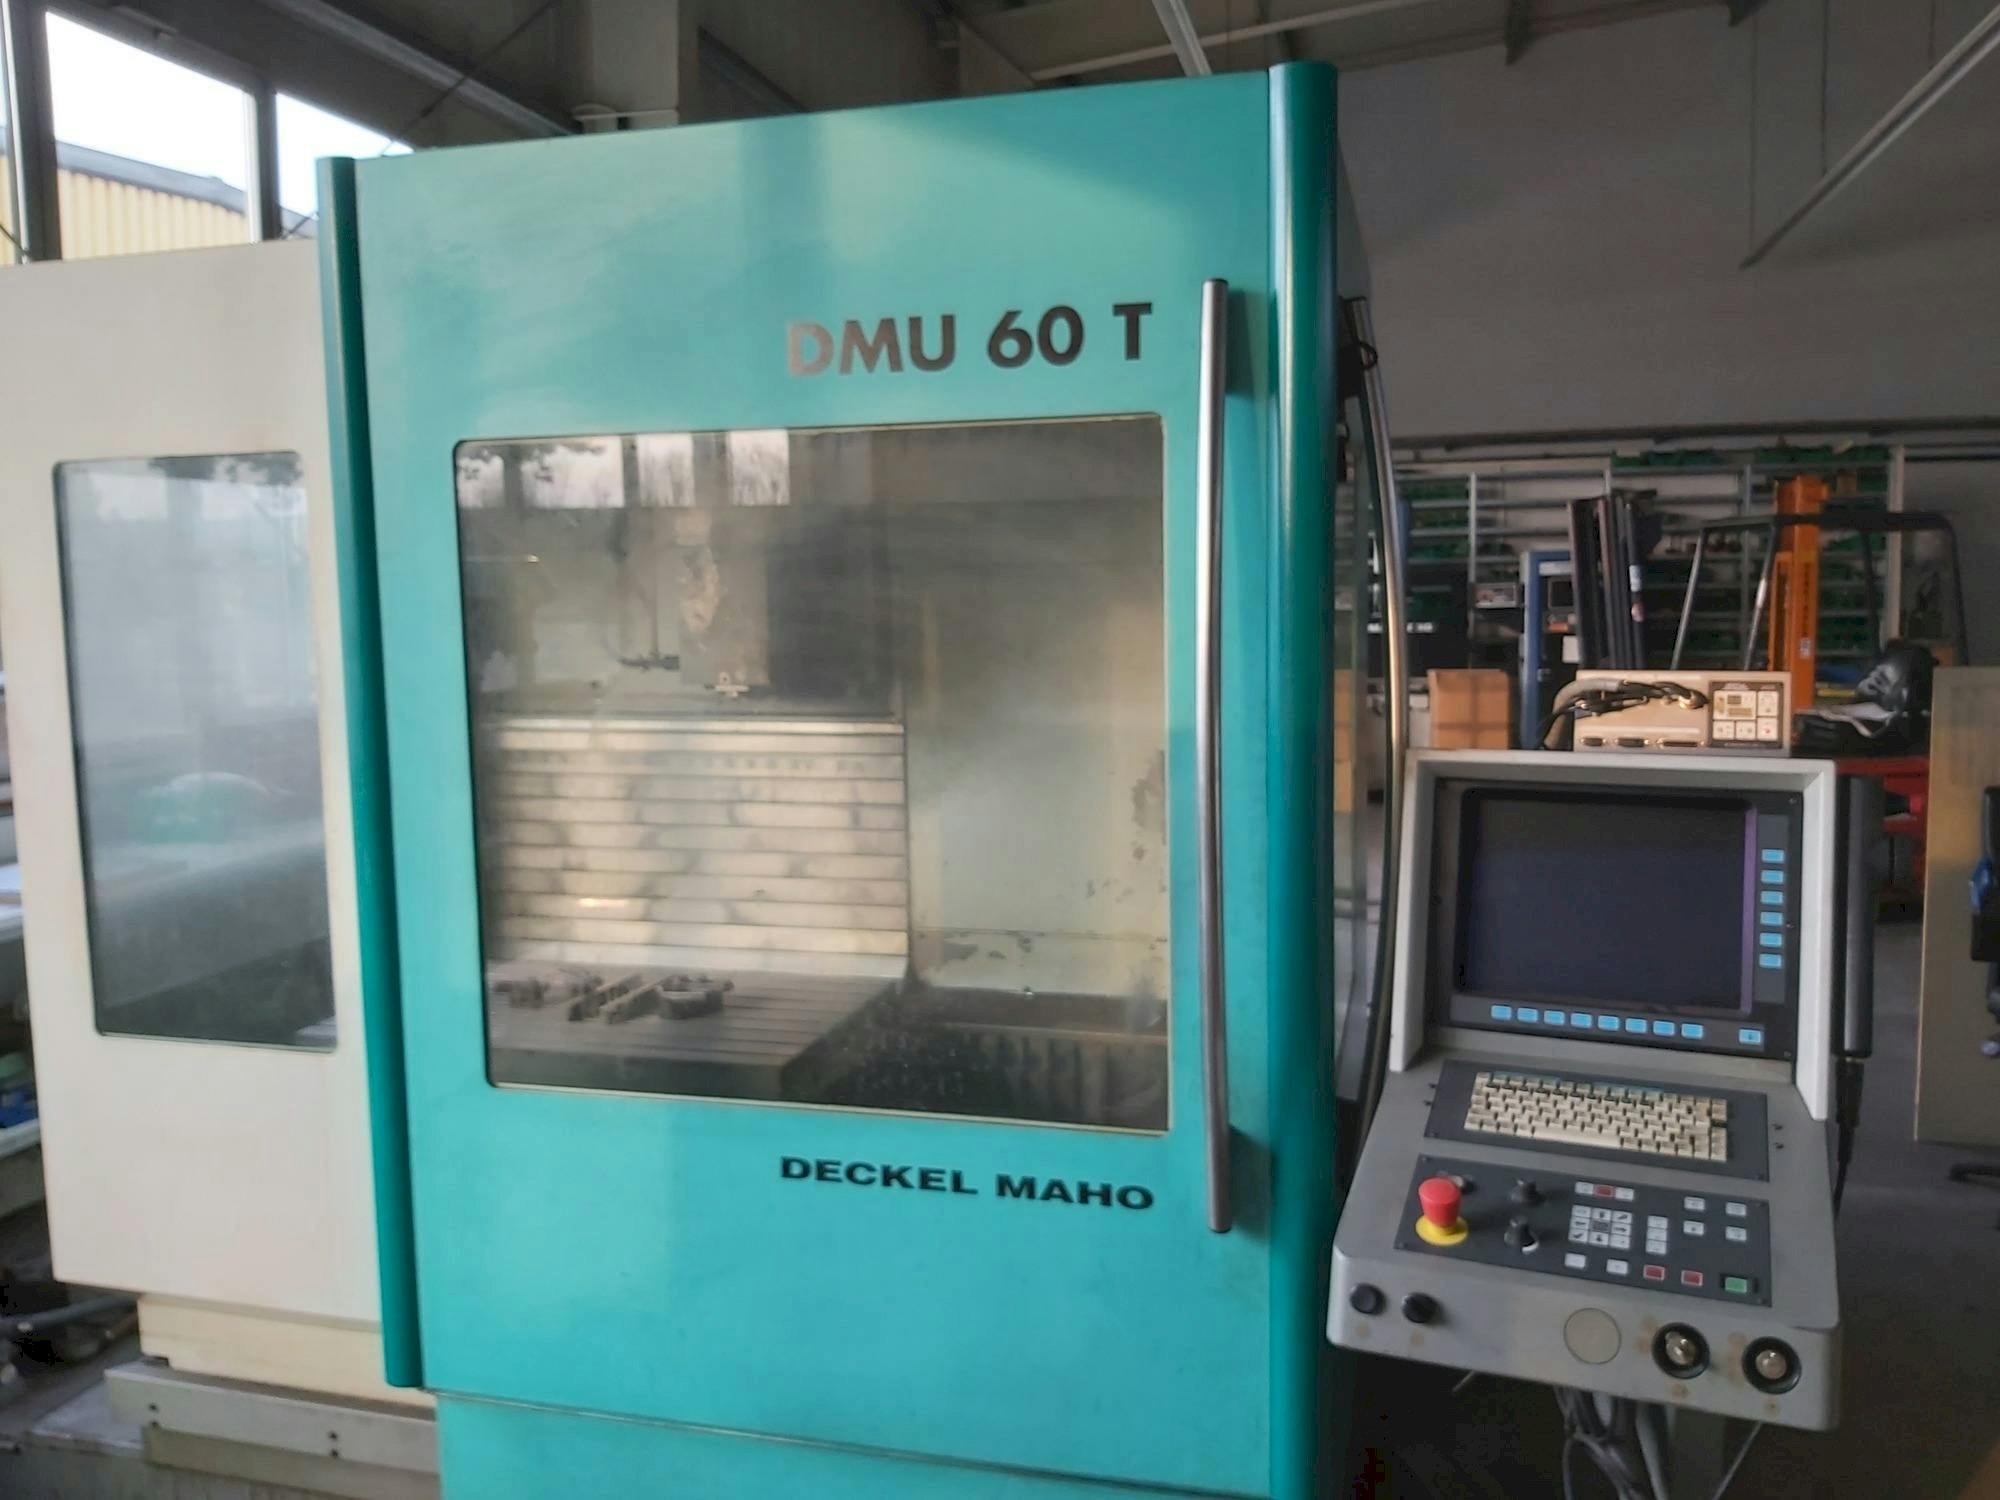 Front view of DECKEL MAHO DMU 60 T  machine